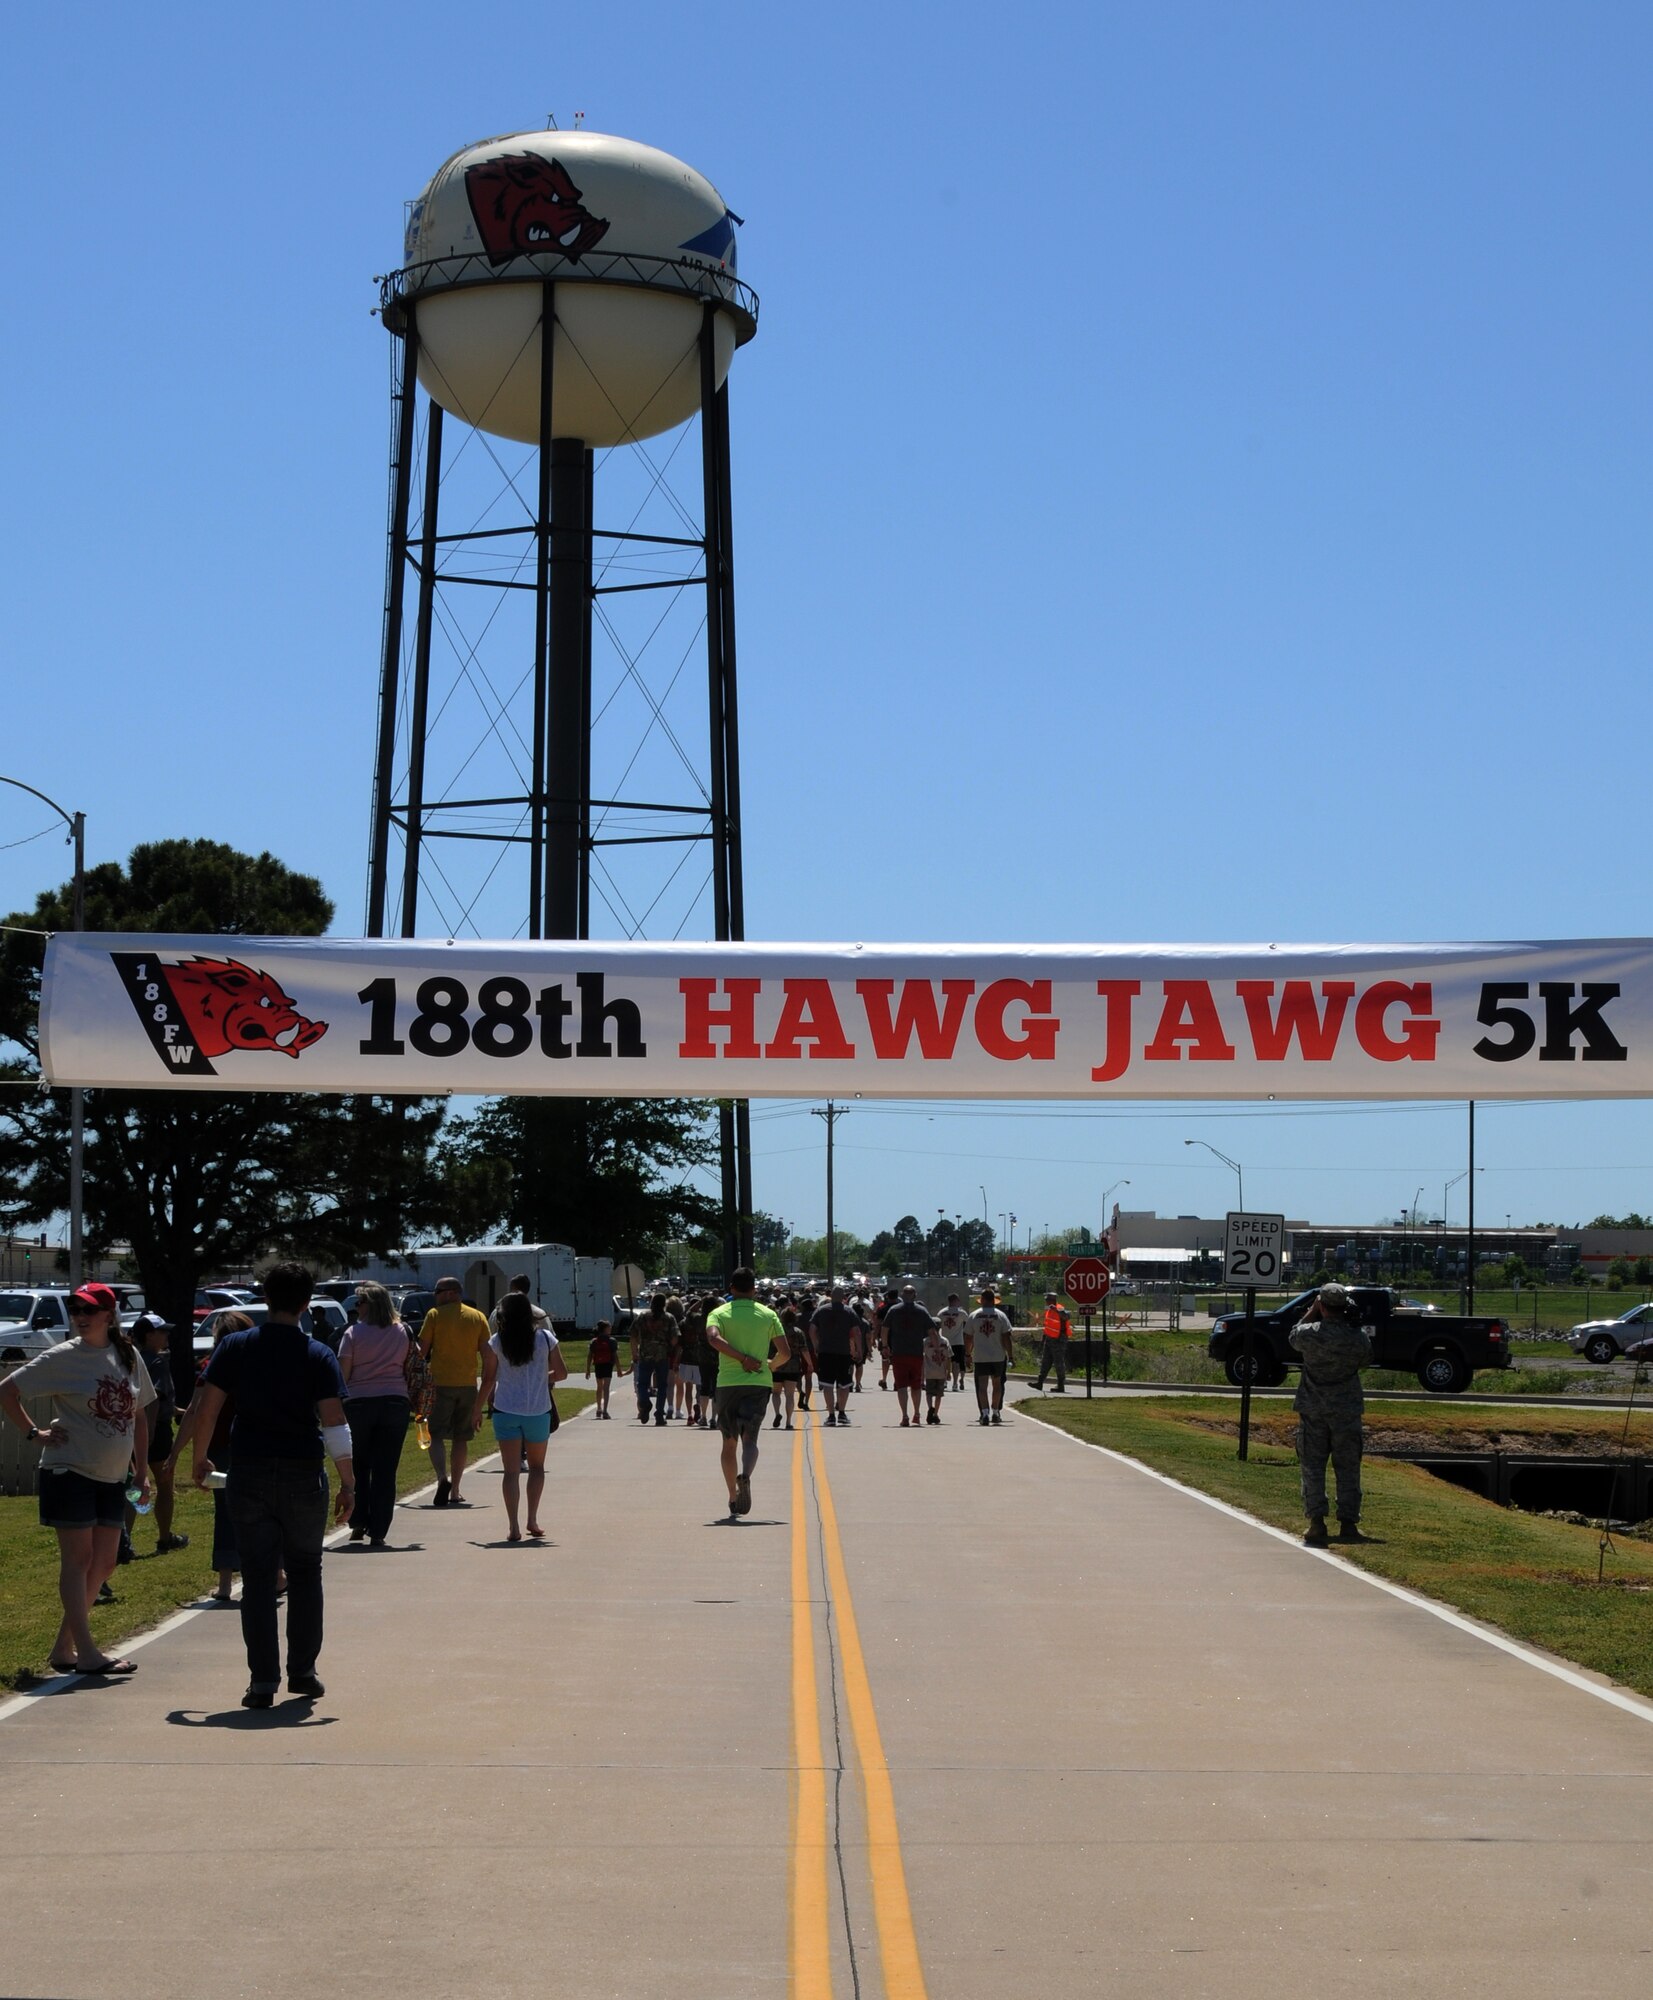 Airmen with the 188th Fighter Wing along with unit family members and retirees participated in the 2nd annual Hawg Jawg 5K at Ebbing Air National Guard Base, Fort Smith, Arkansas, May 3, 2014. Following the race, the wing hosted a fishing derby on base for 188th families. (U.S. Air National Guard photo by Airman First Class Cody Martin/Released)